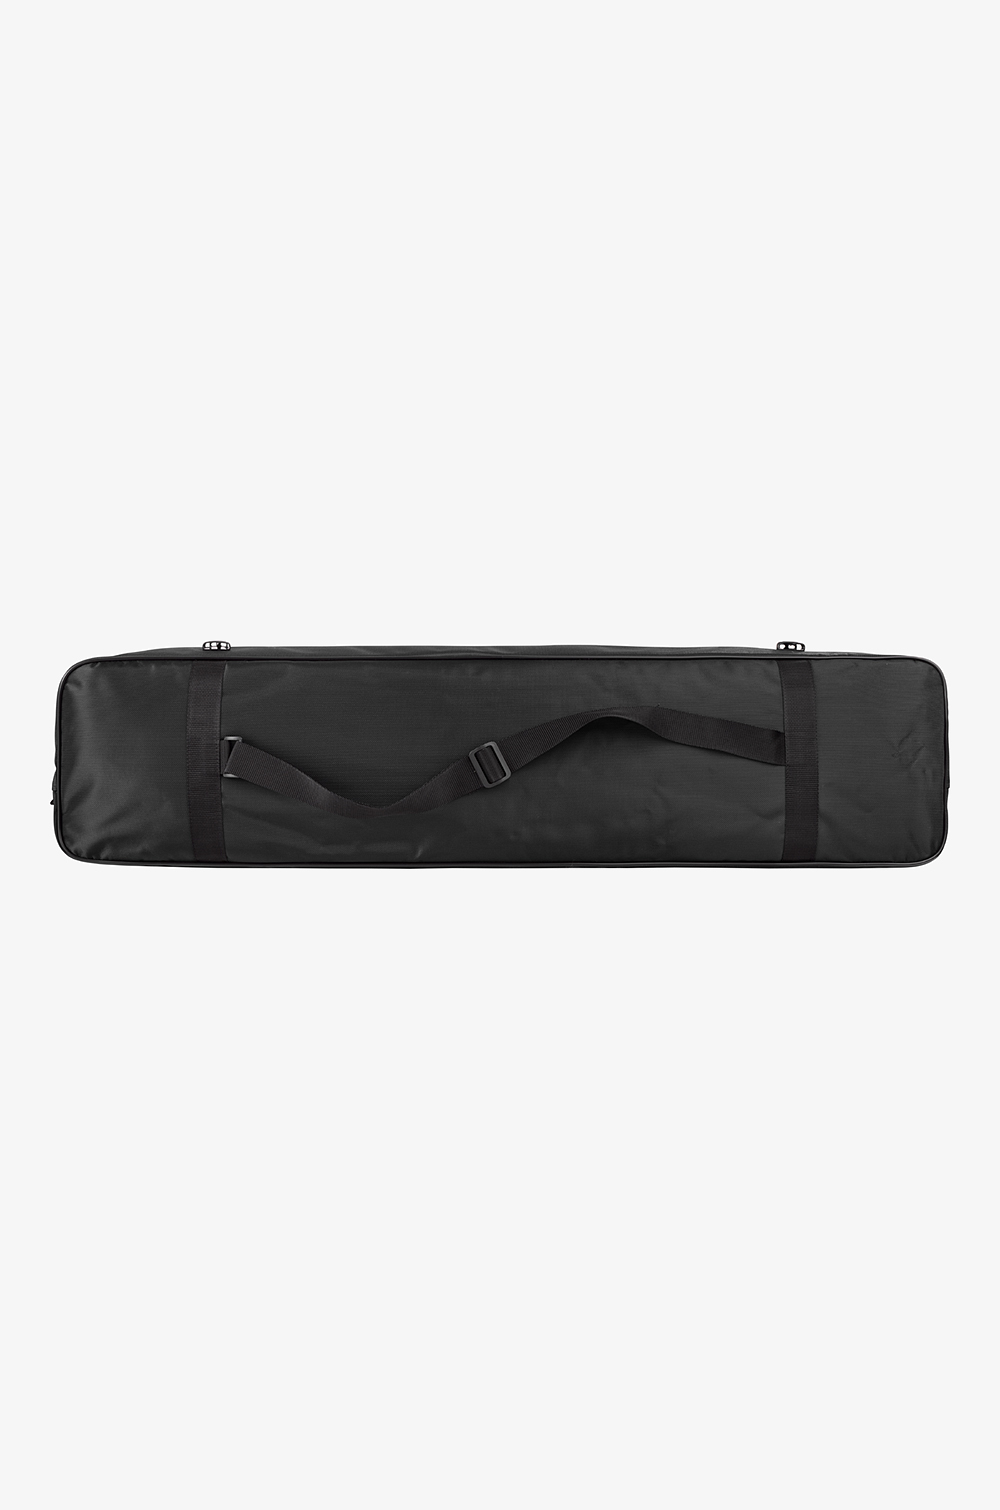 Top Bag for Rollbag